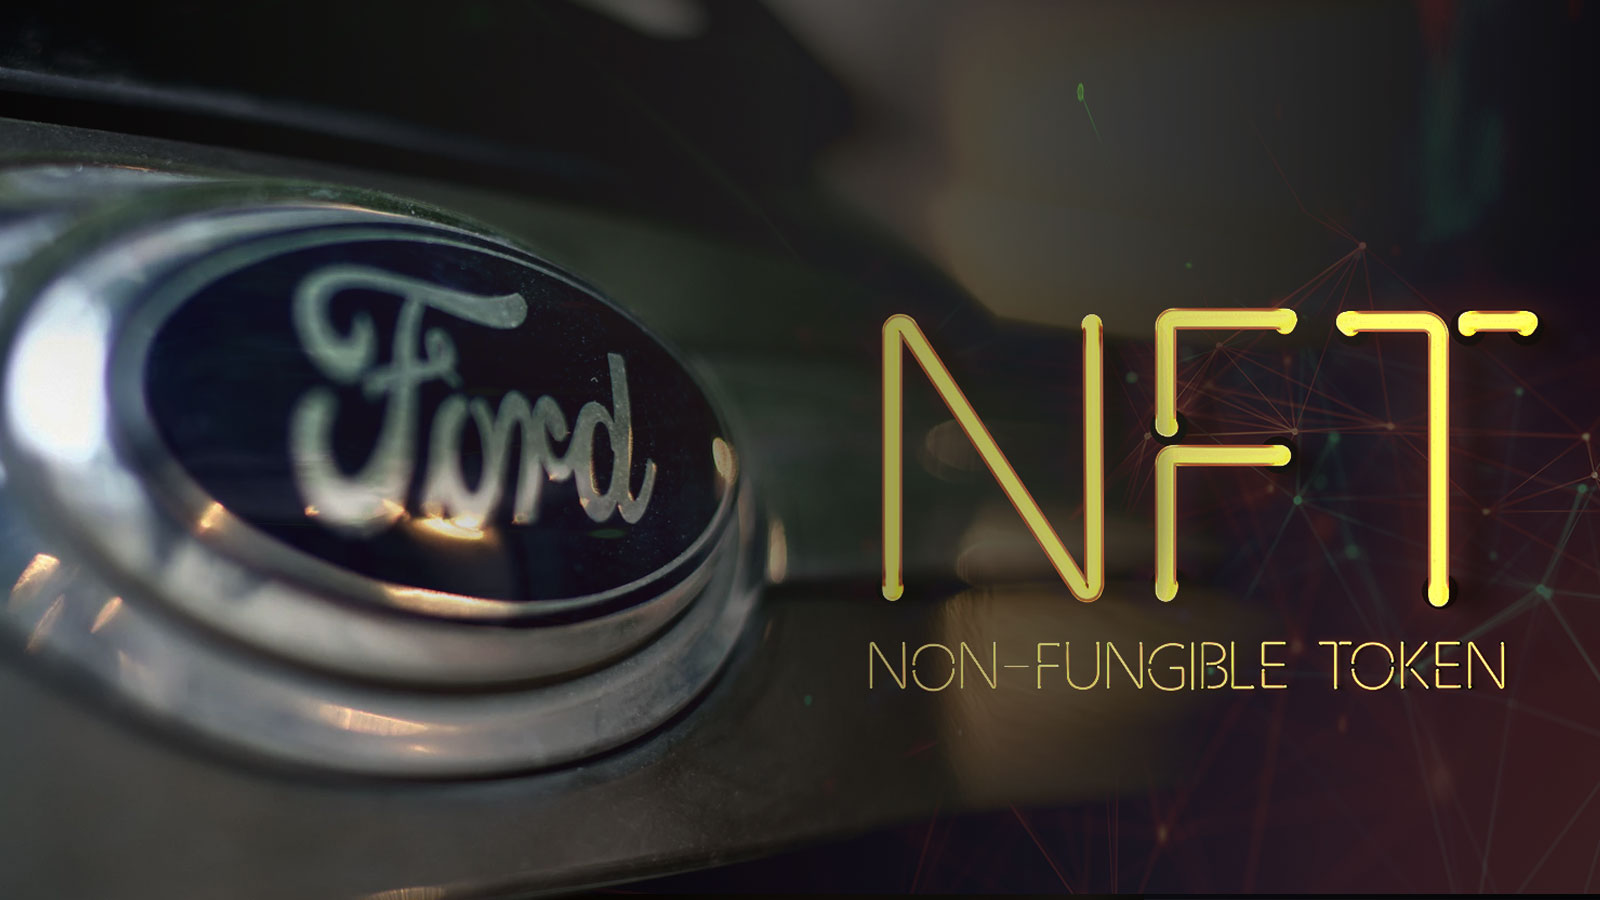 Ford prepares to enter the Metaverse with virtual automobiles and NFTs